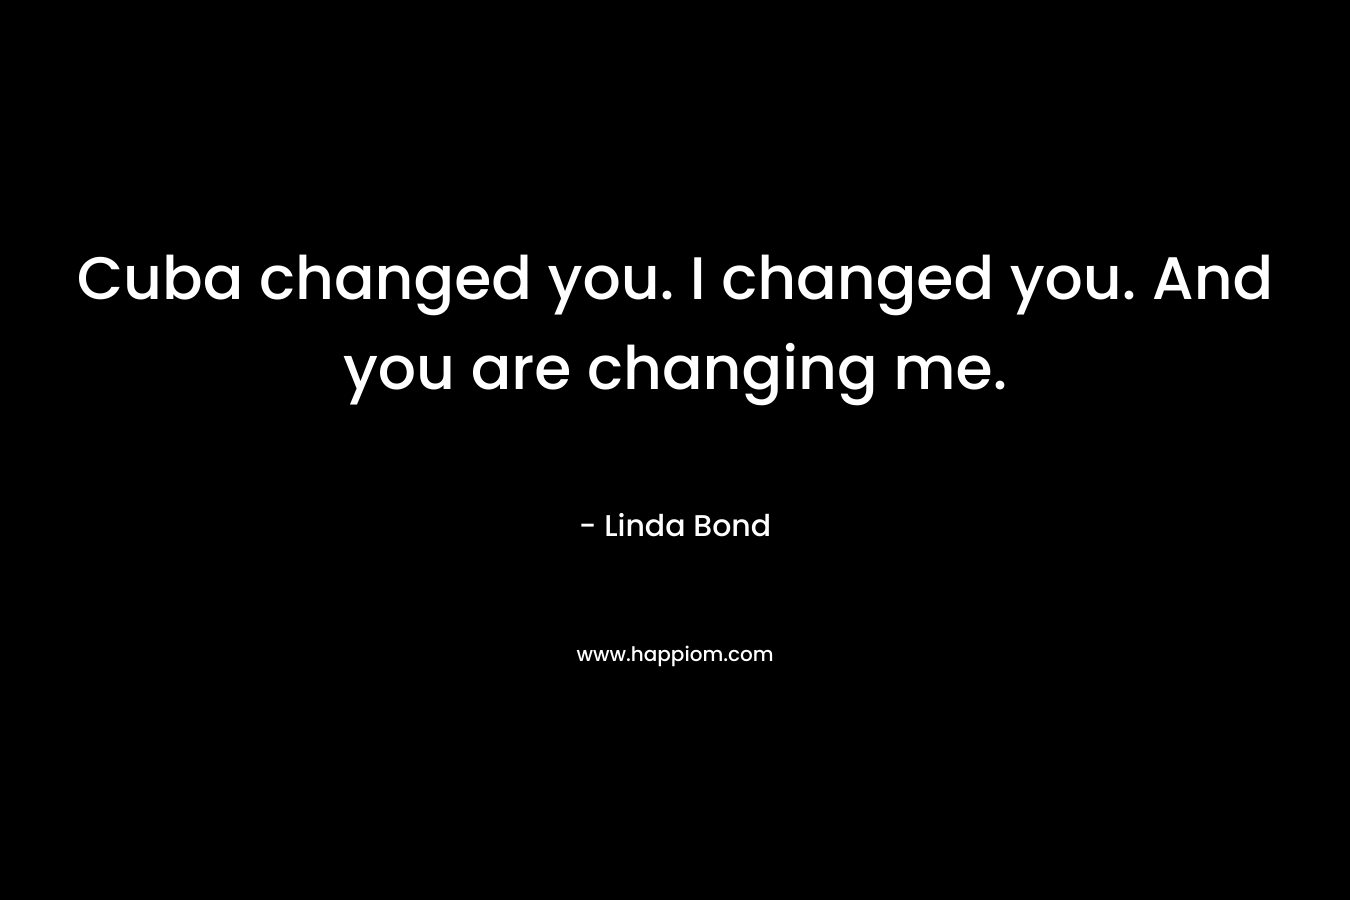 Cuba changed you. I changed you. And you are changing me. – Linda Bond